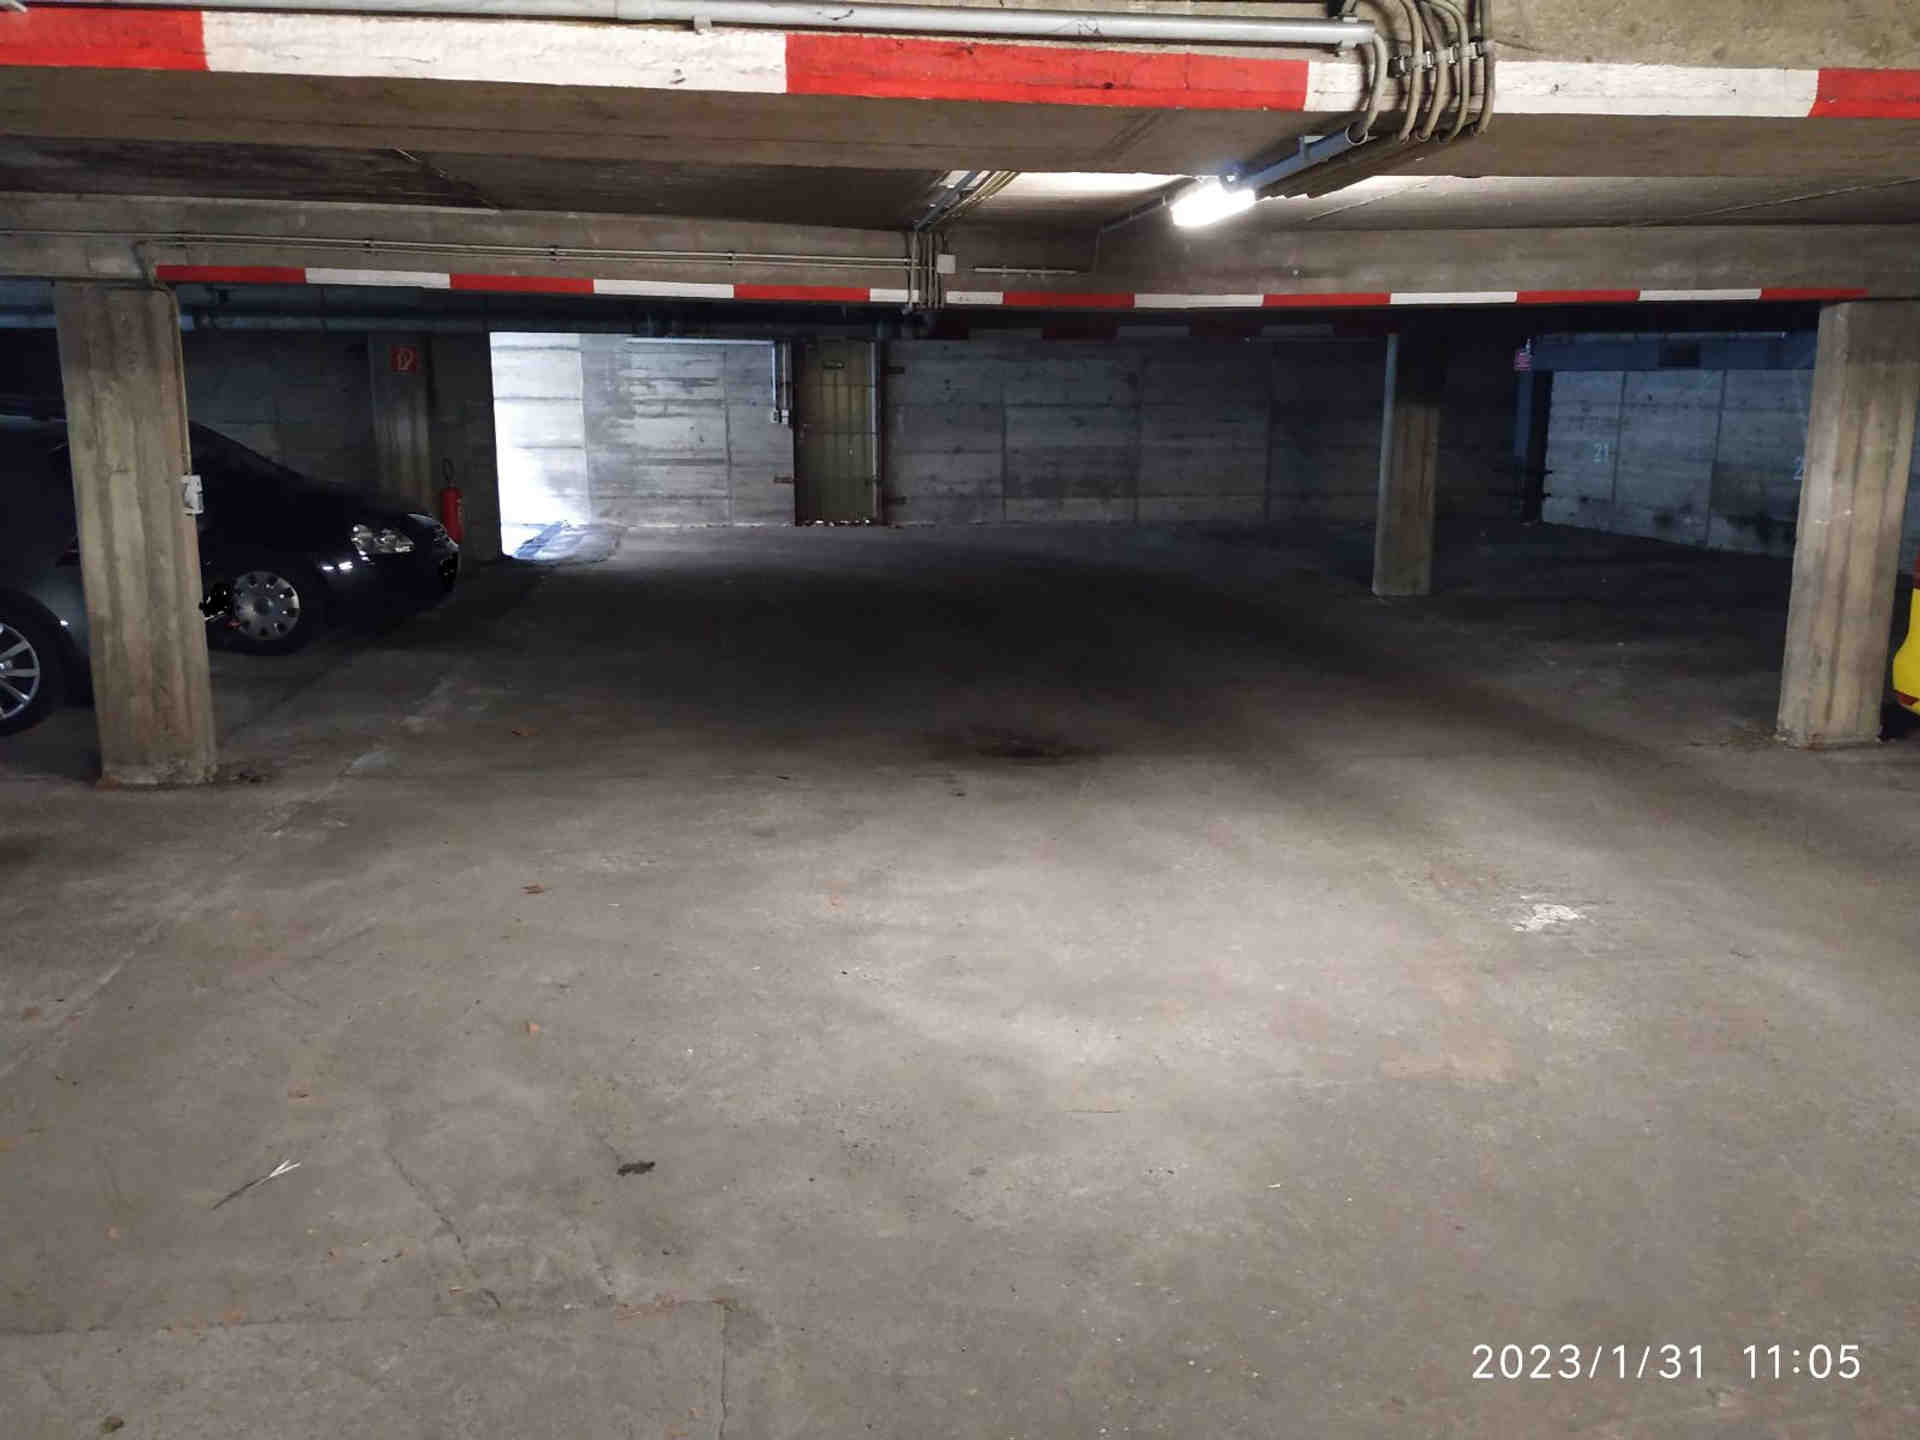 Numbered private underground parking with key switch - Arcostraße, 10587 Berlin - Photo 6 of 8